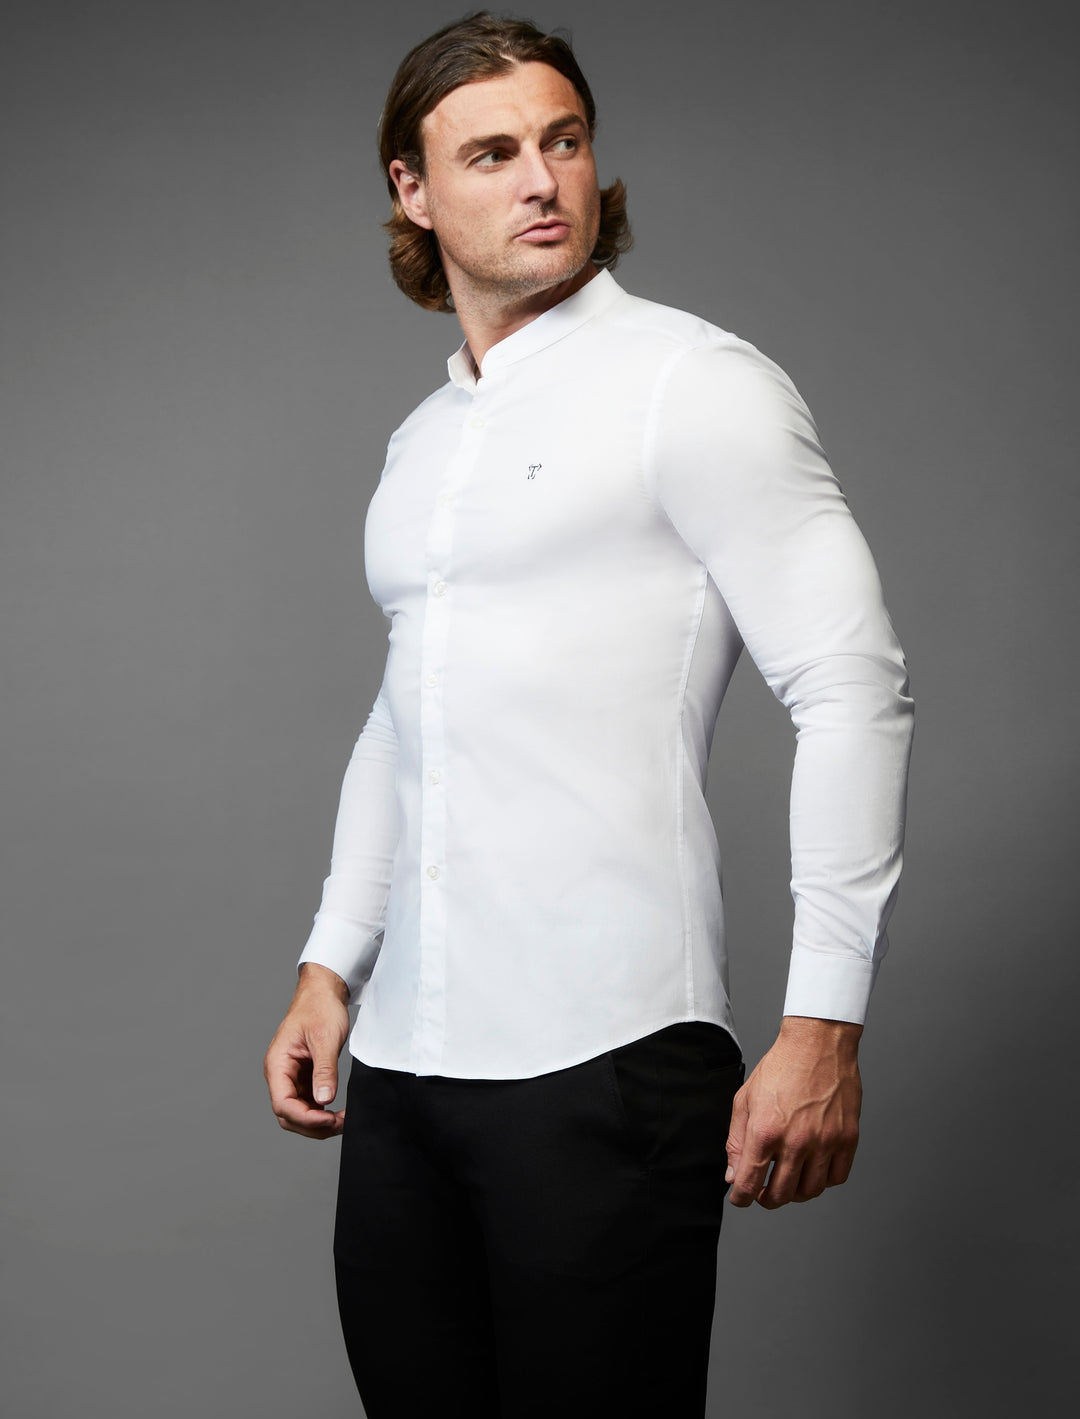 Elegant white muscle fit shirt with a grandad collar style